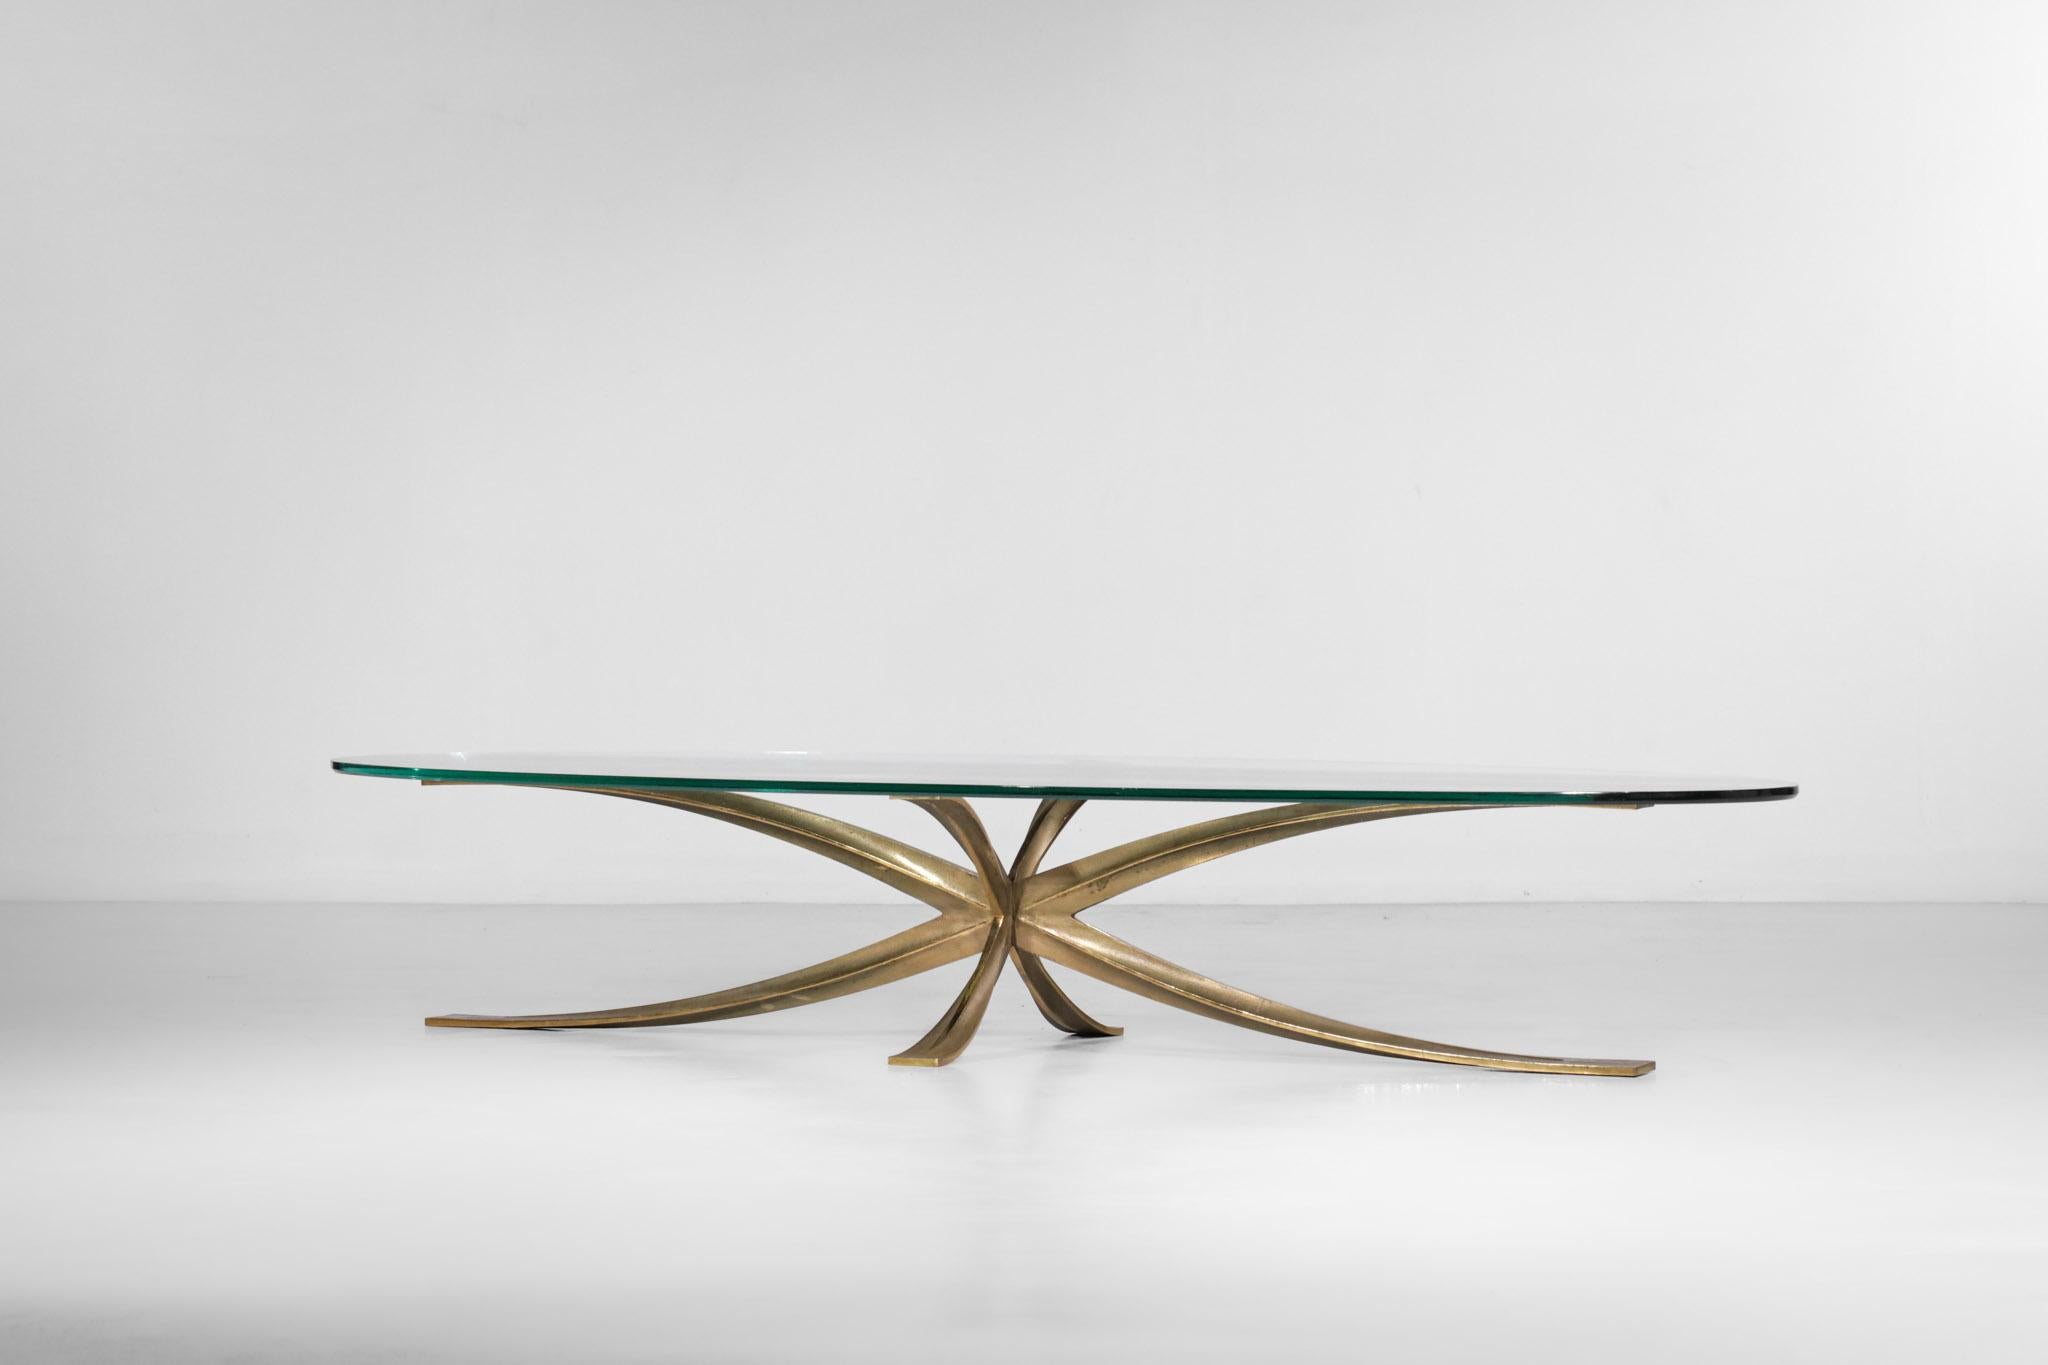 Large Michel Mangematin Coffee Table in Gilt Bronze and Oval Glass 1960's Design For Sale 3